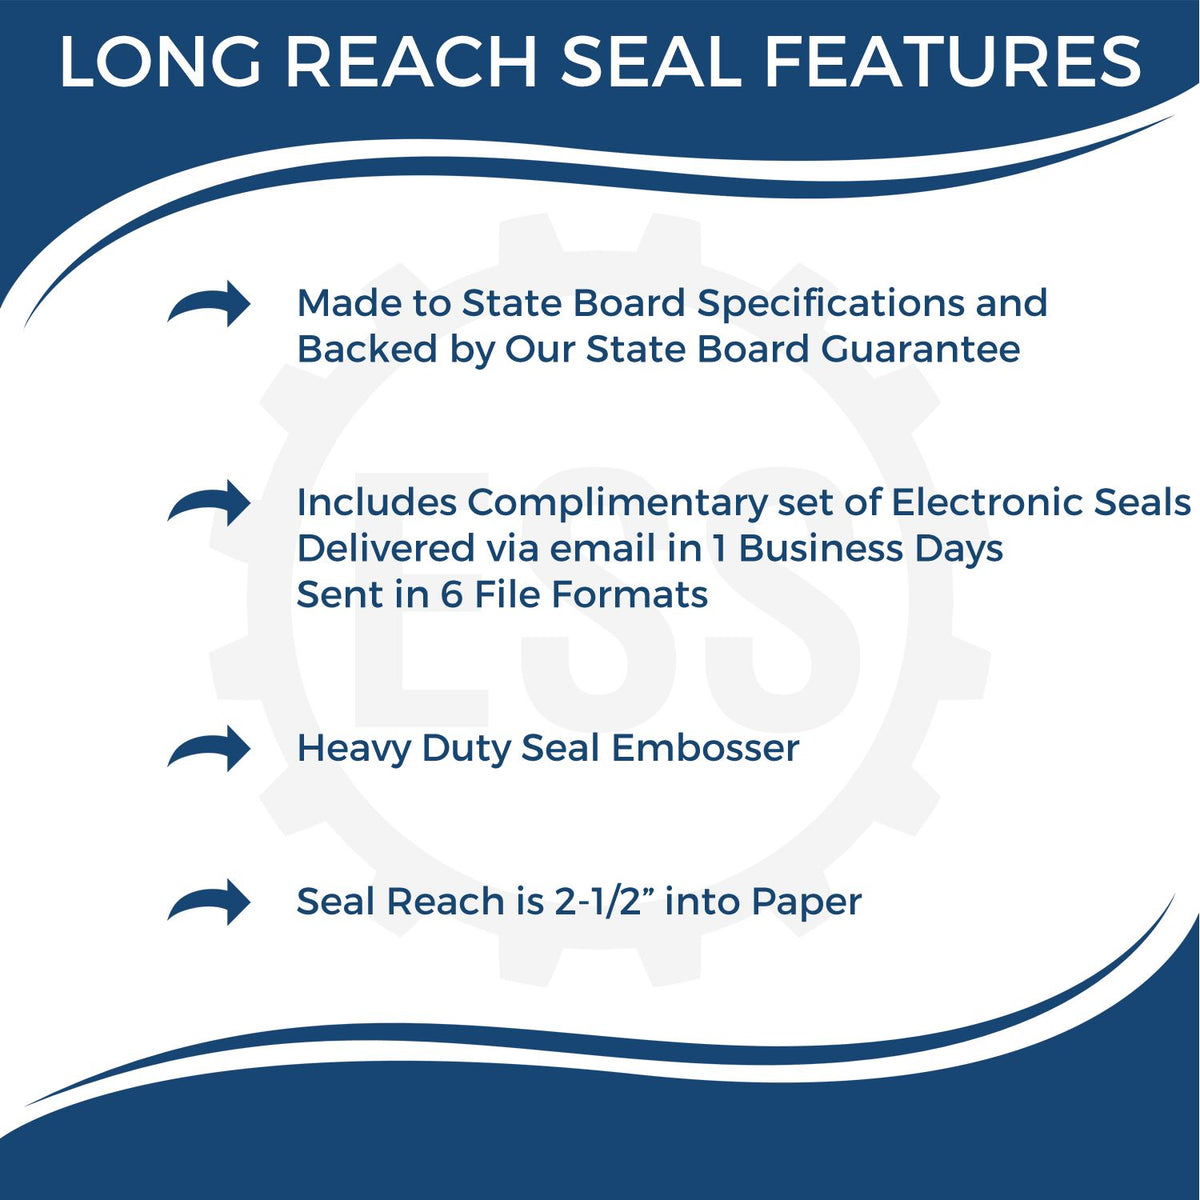 A picture of an infographic highlighting the selling points for the Long Reach Alabama Land Surveyor Seal